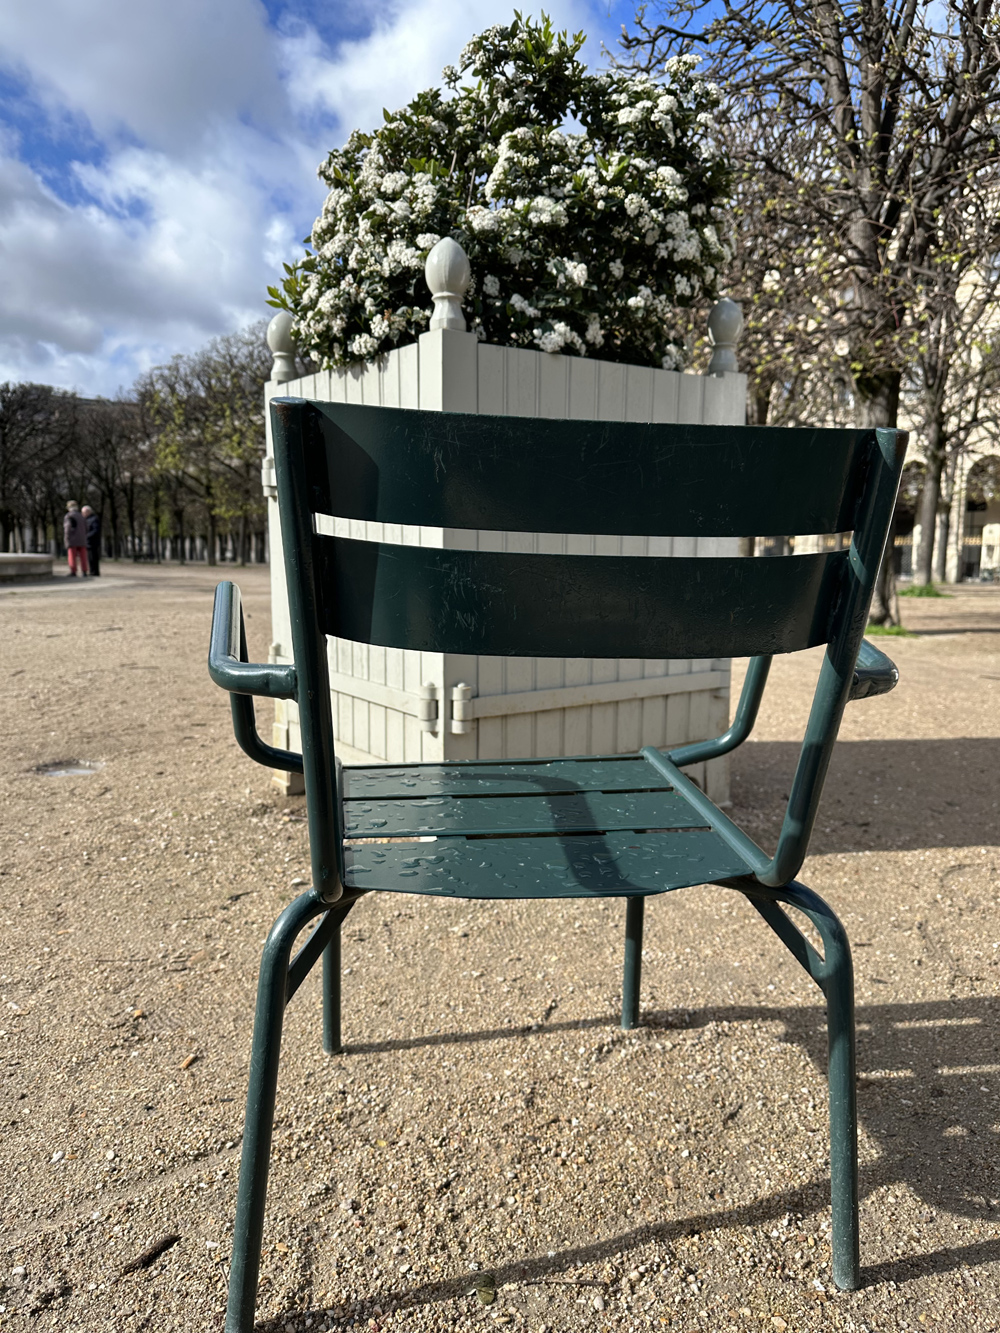 Comfortable place for relaxation and meditation, Palais Royal